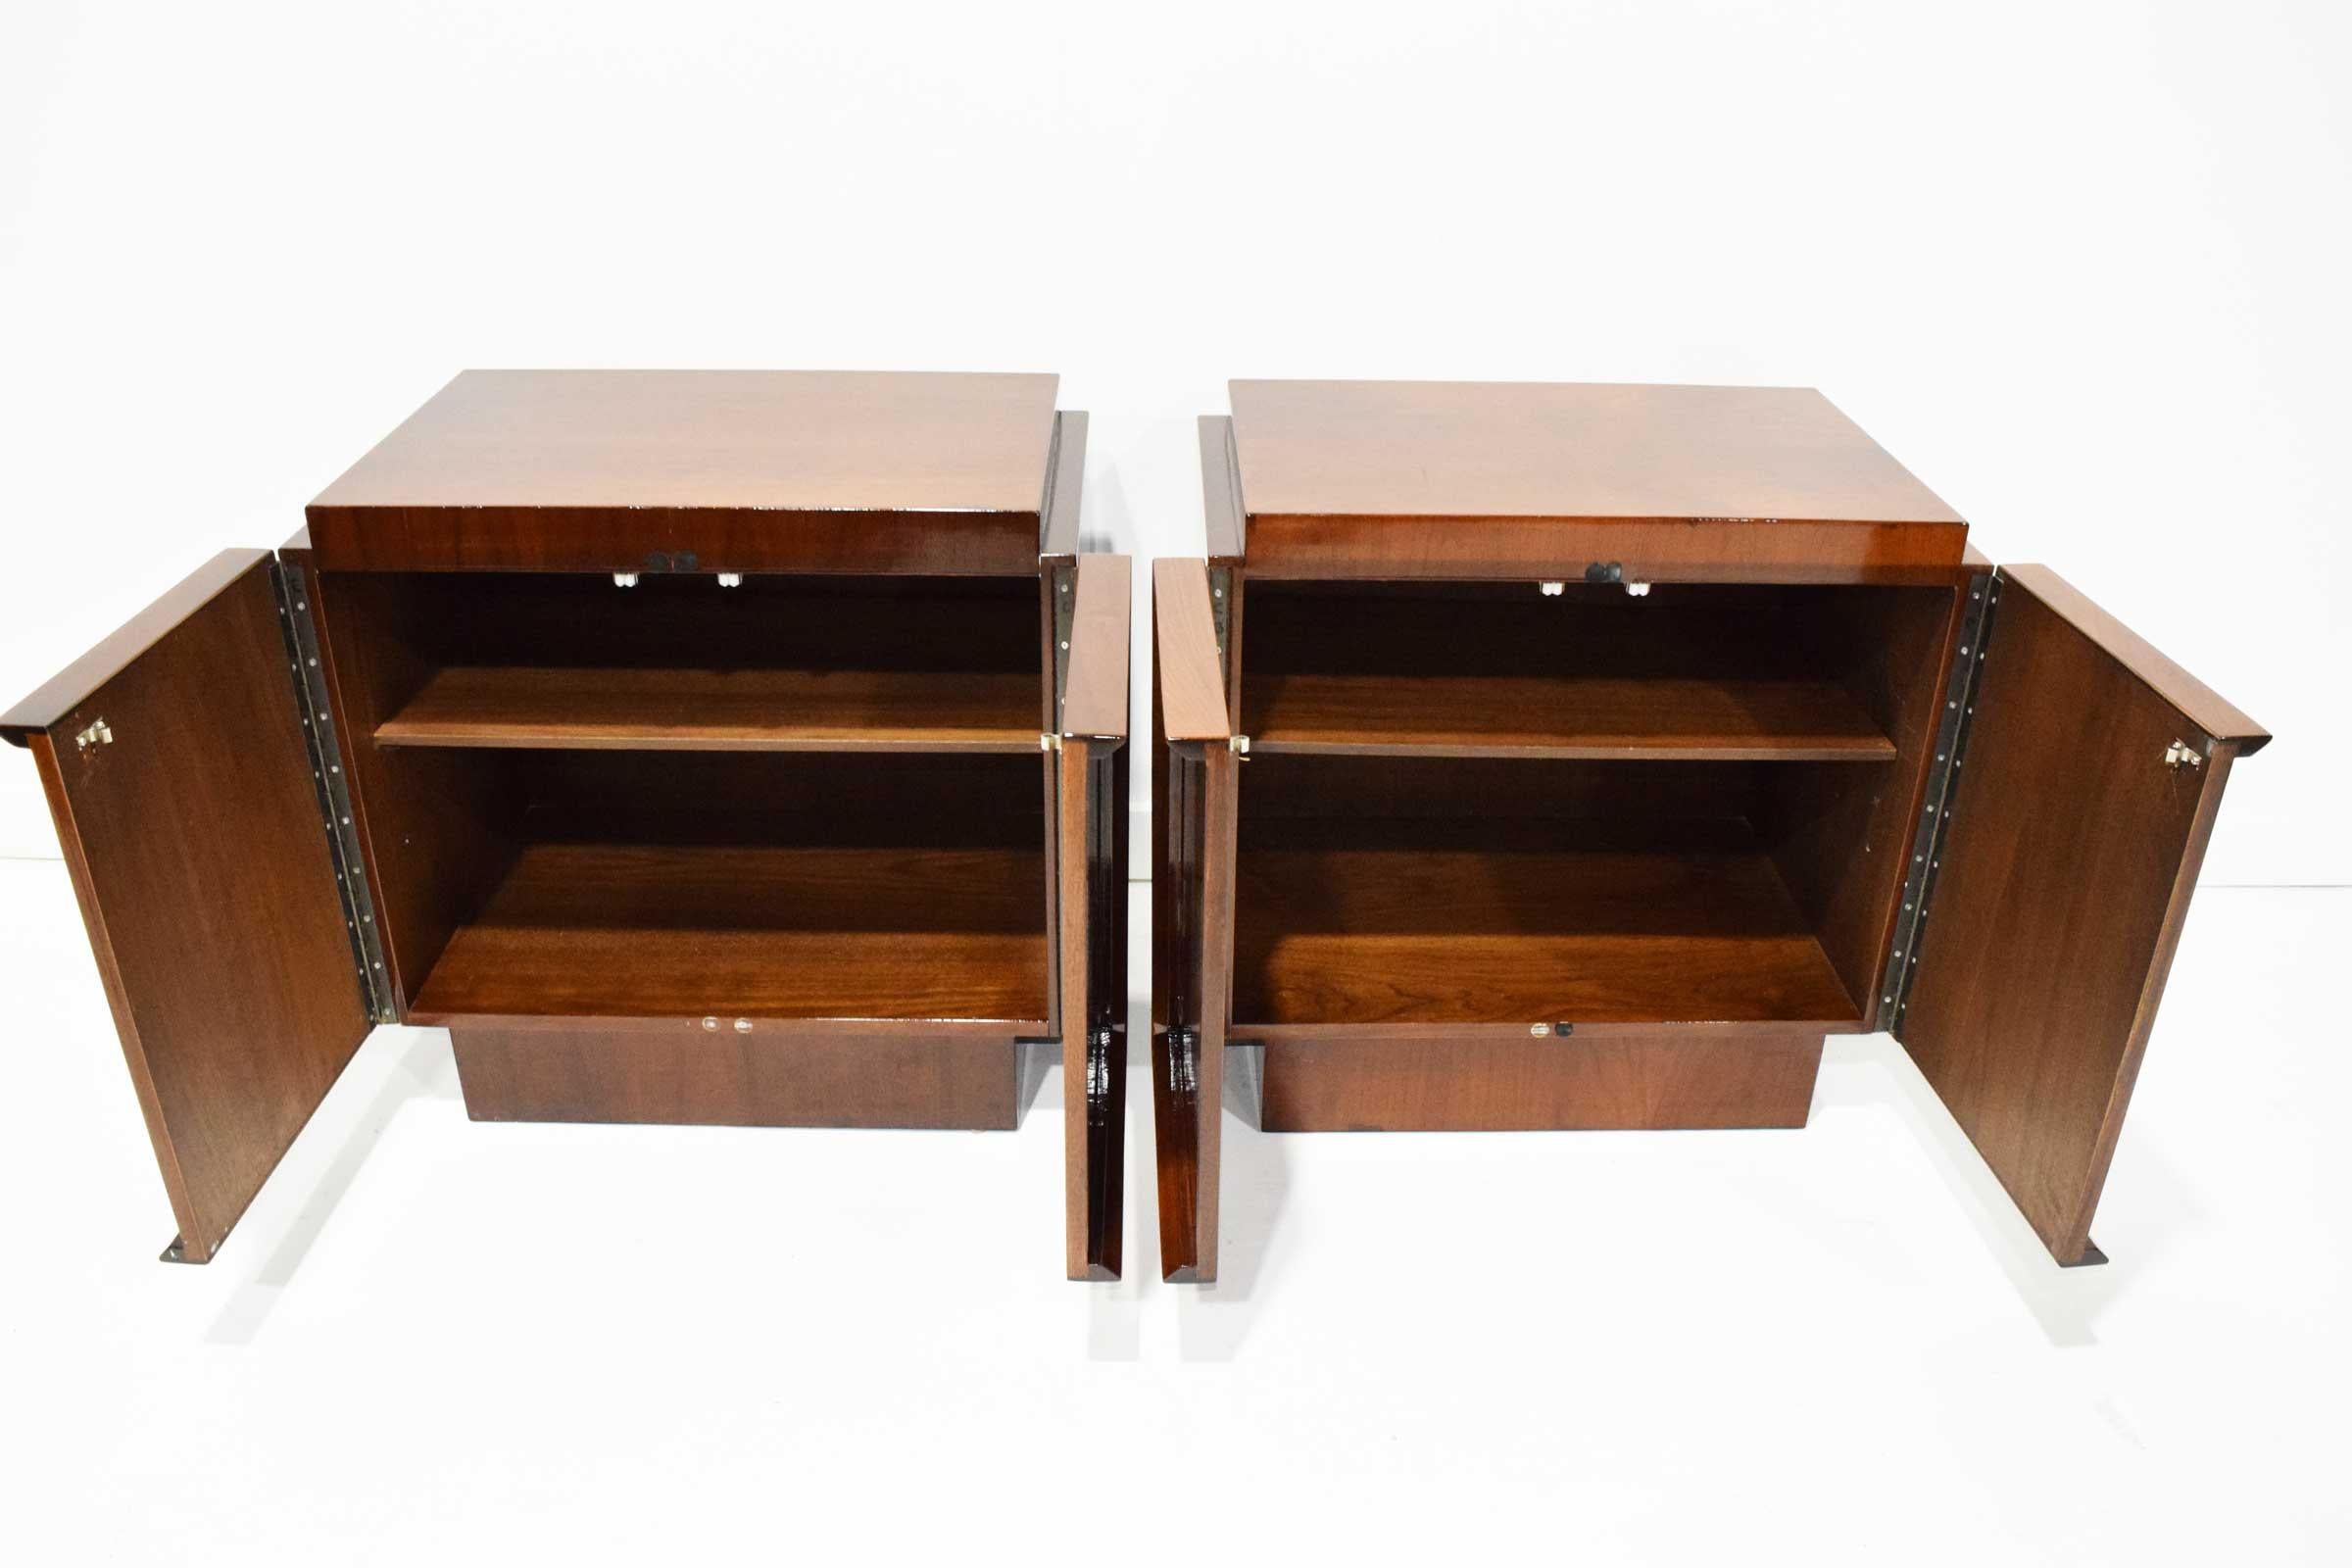 Very nice pair of nightstands in a glossy finish. Nightstands have tow doors that swing outward with a hinge the full length of the door for added stability. Behind the doors are a single shelf.